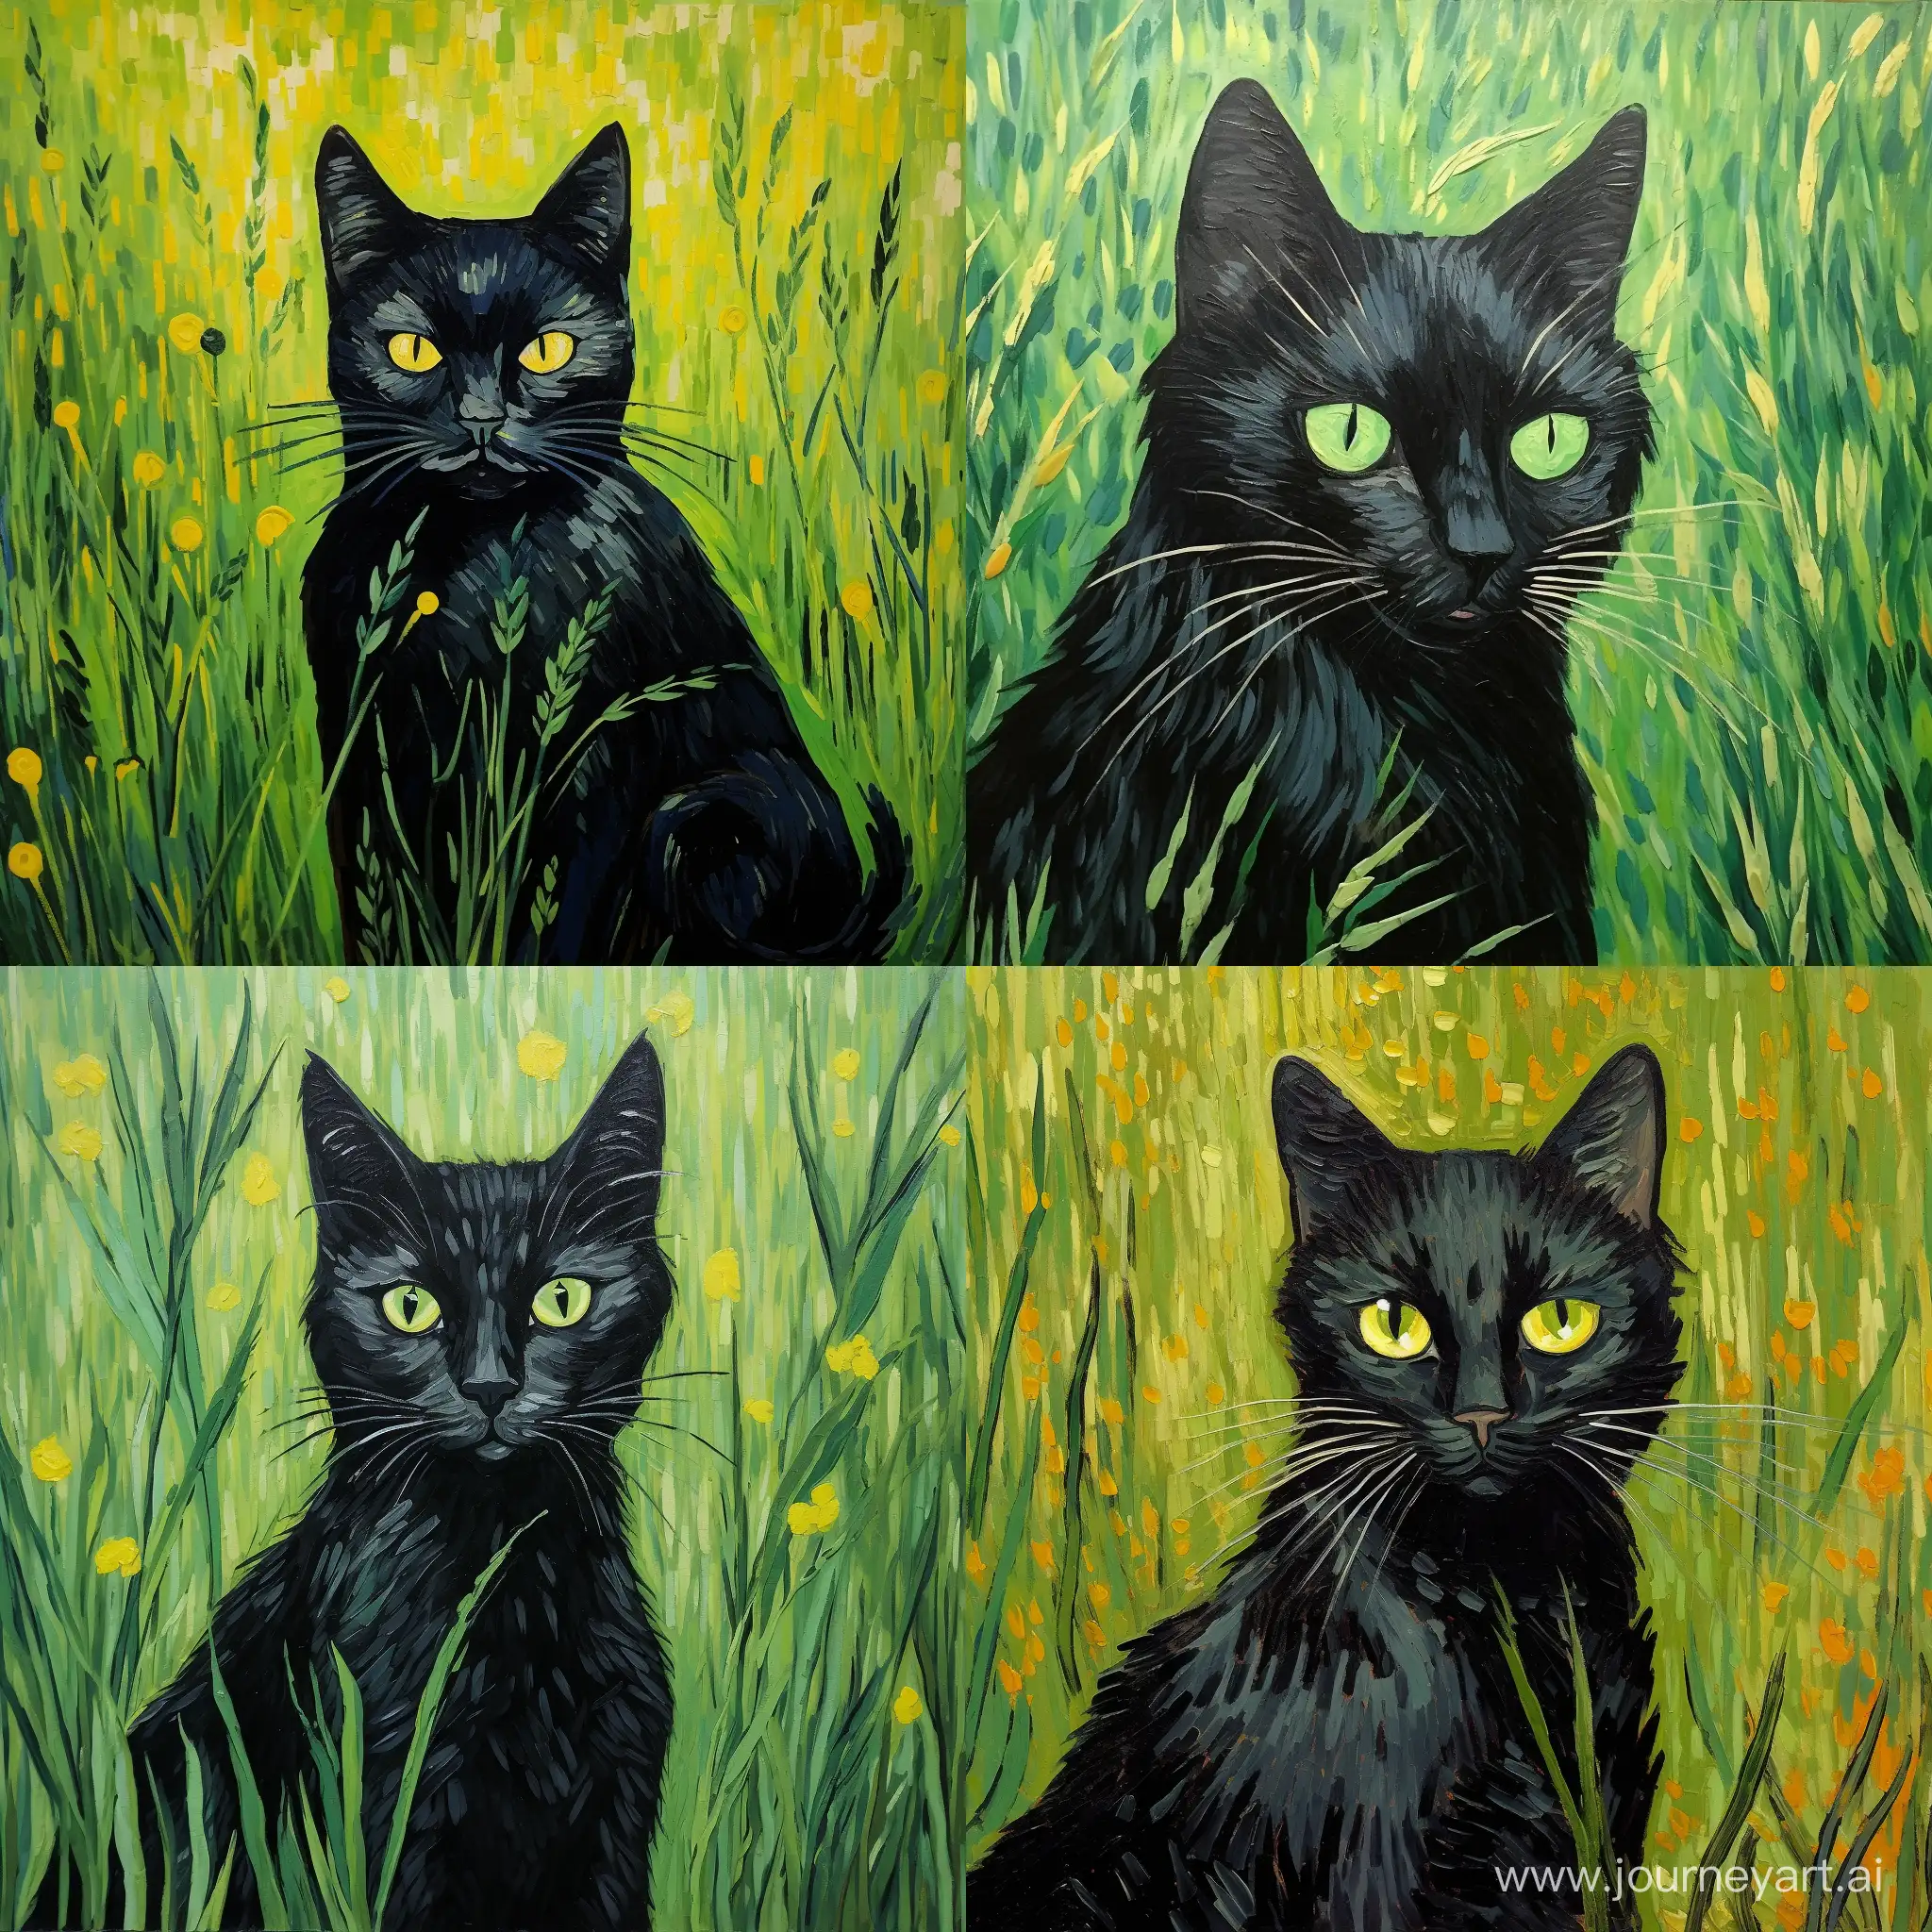 Stunning-Black-Cat-with-Enchanting-Green-Eyes-Artistic-Rendering-by-Vincent-van-Gogh